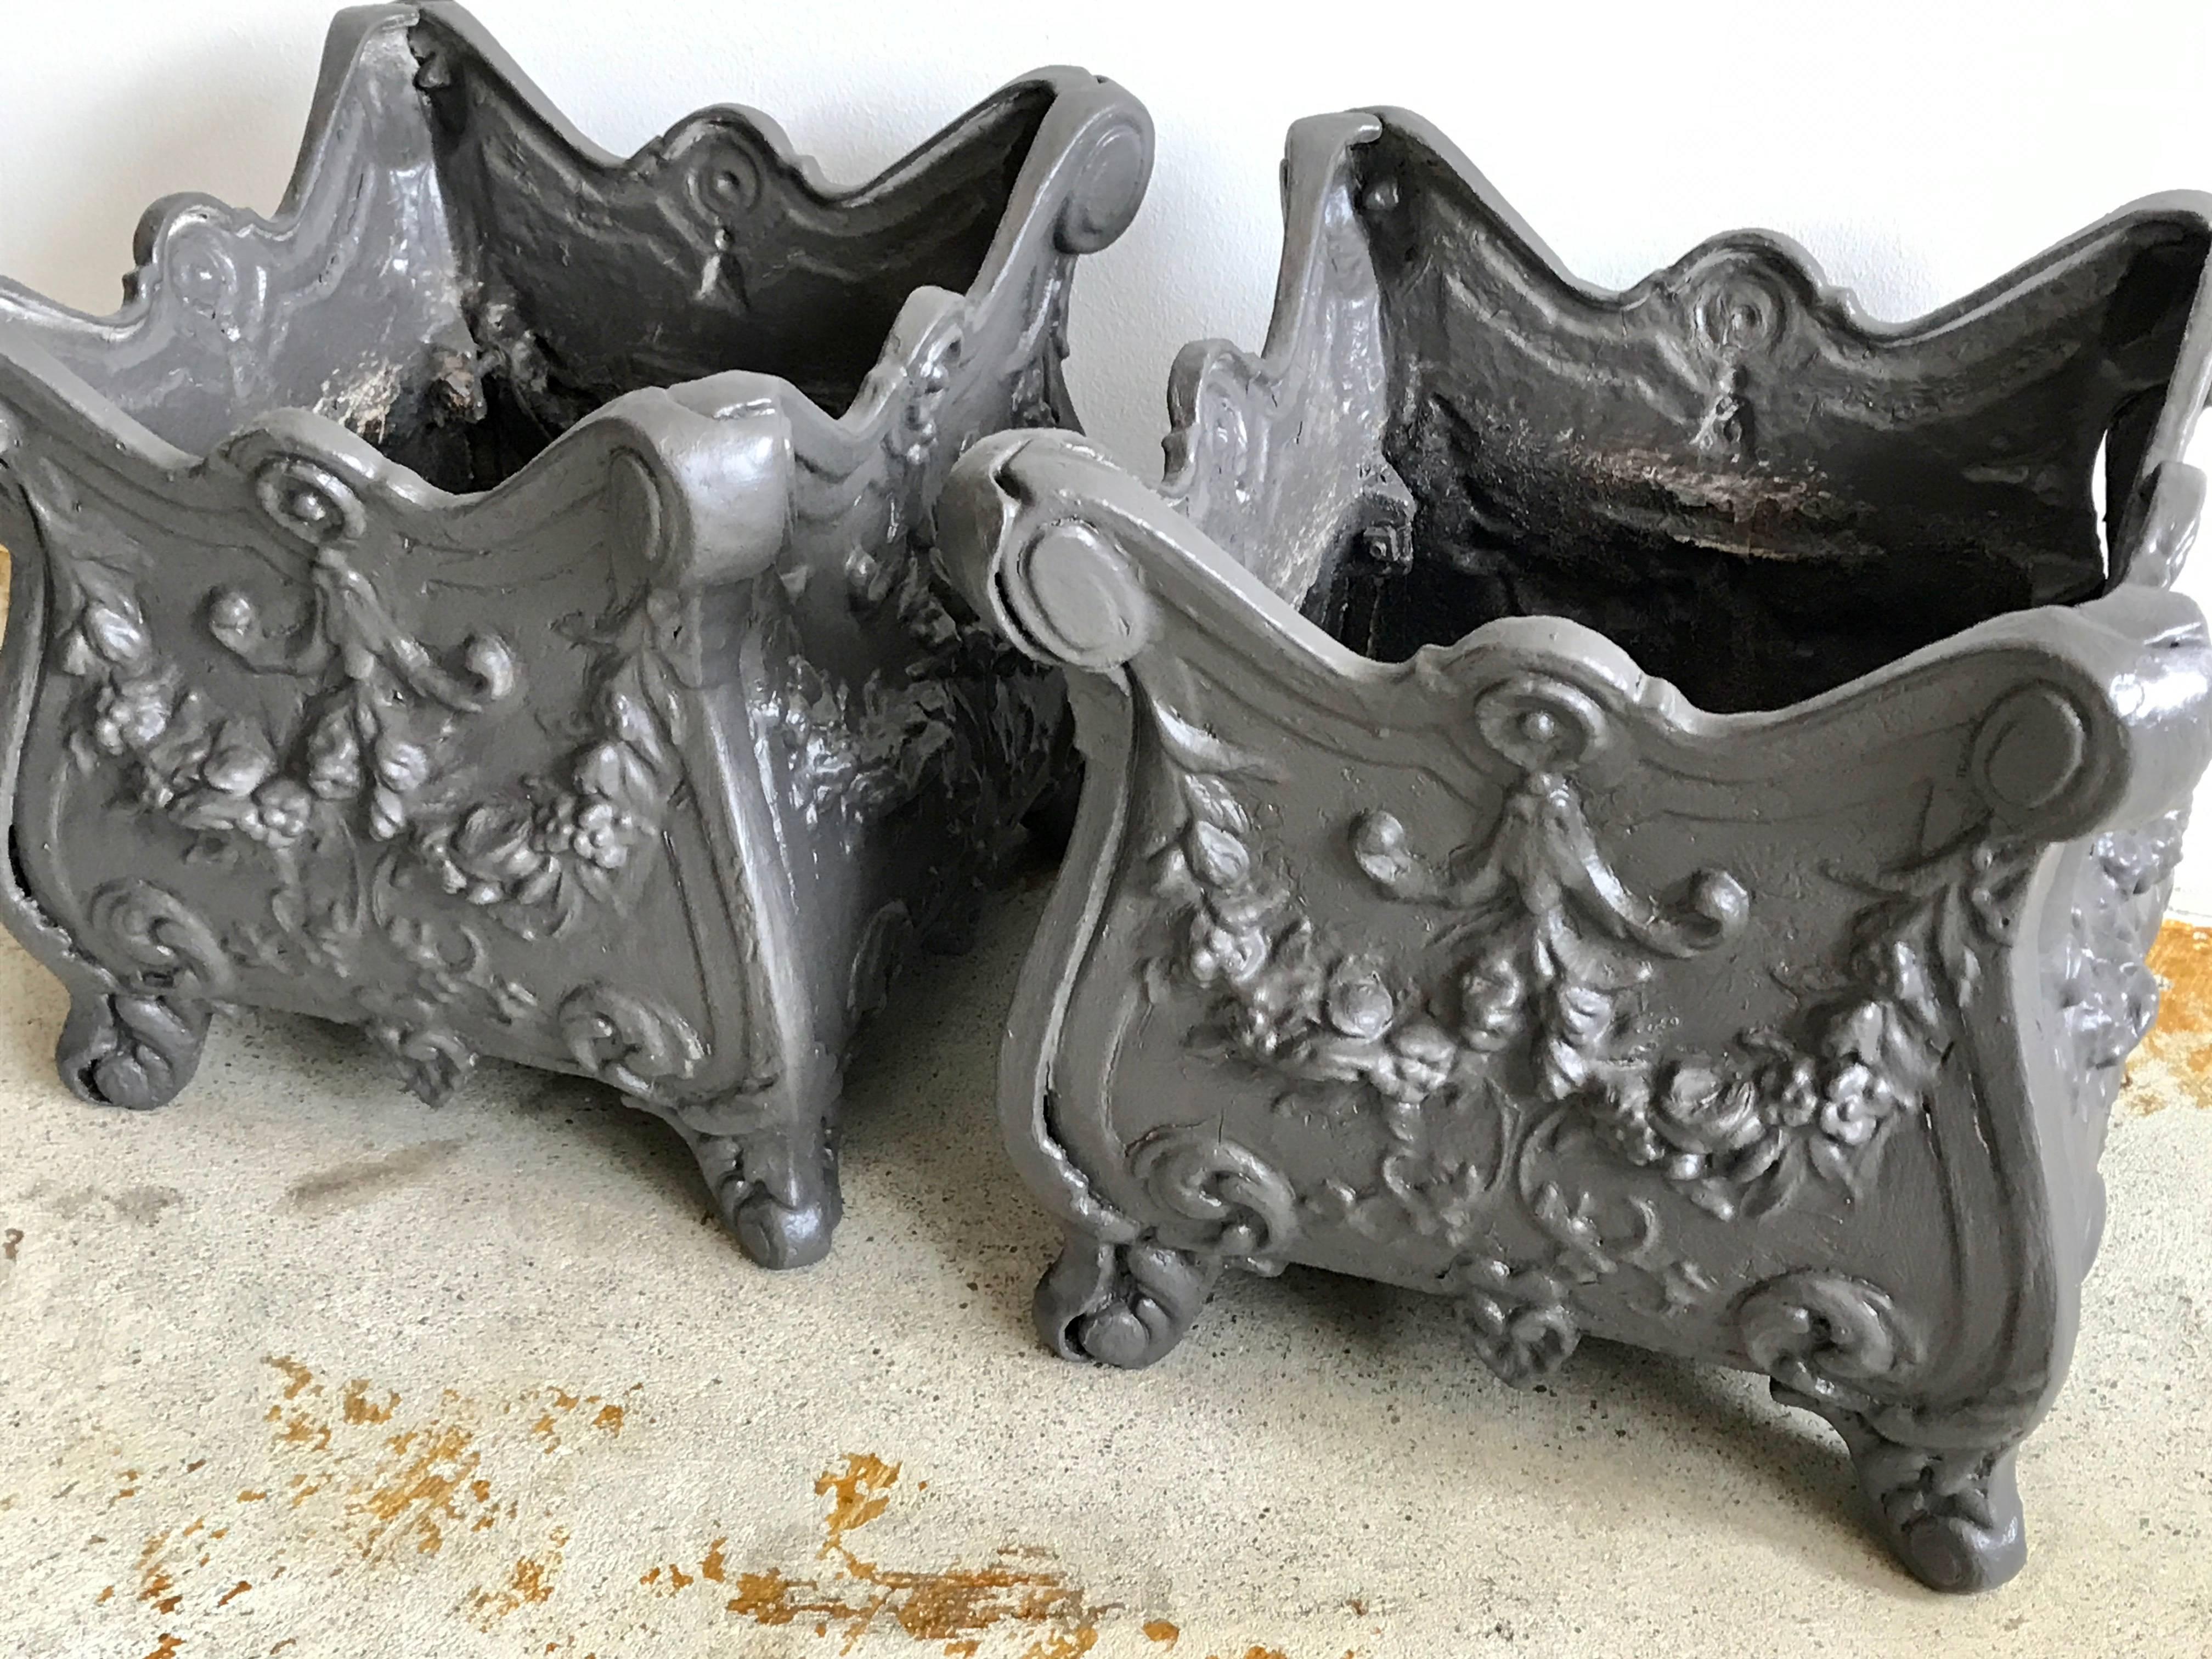 Victorian Pair of Square Cast Iron Garden Planters or Urns, early 20th Century